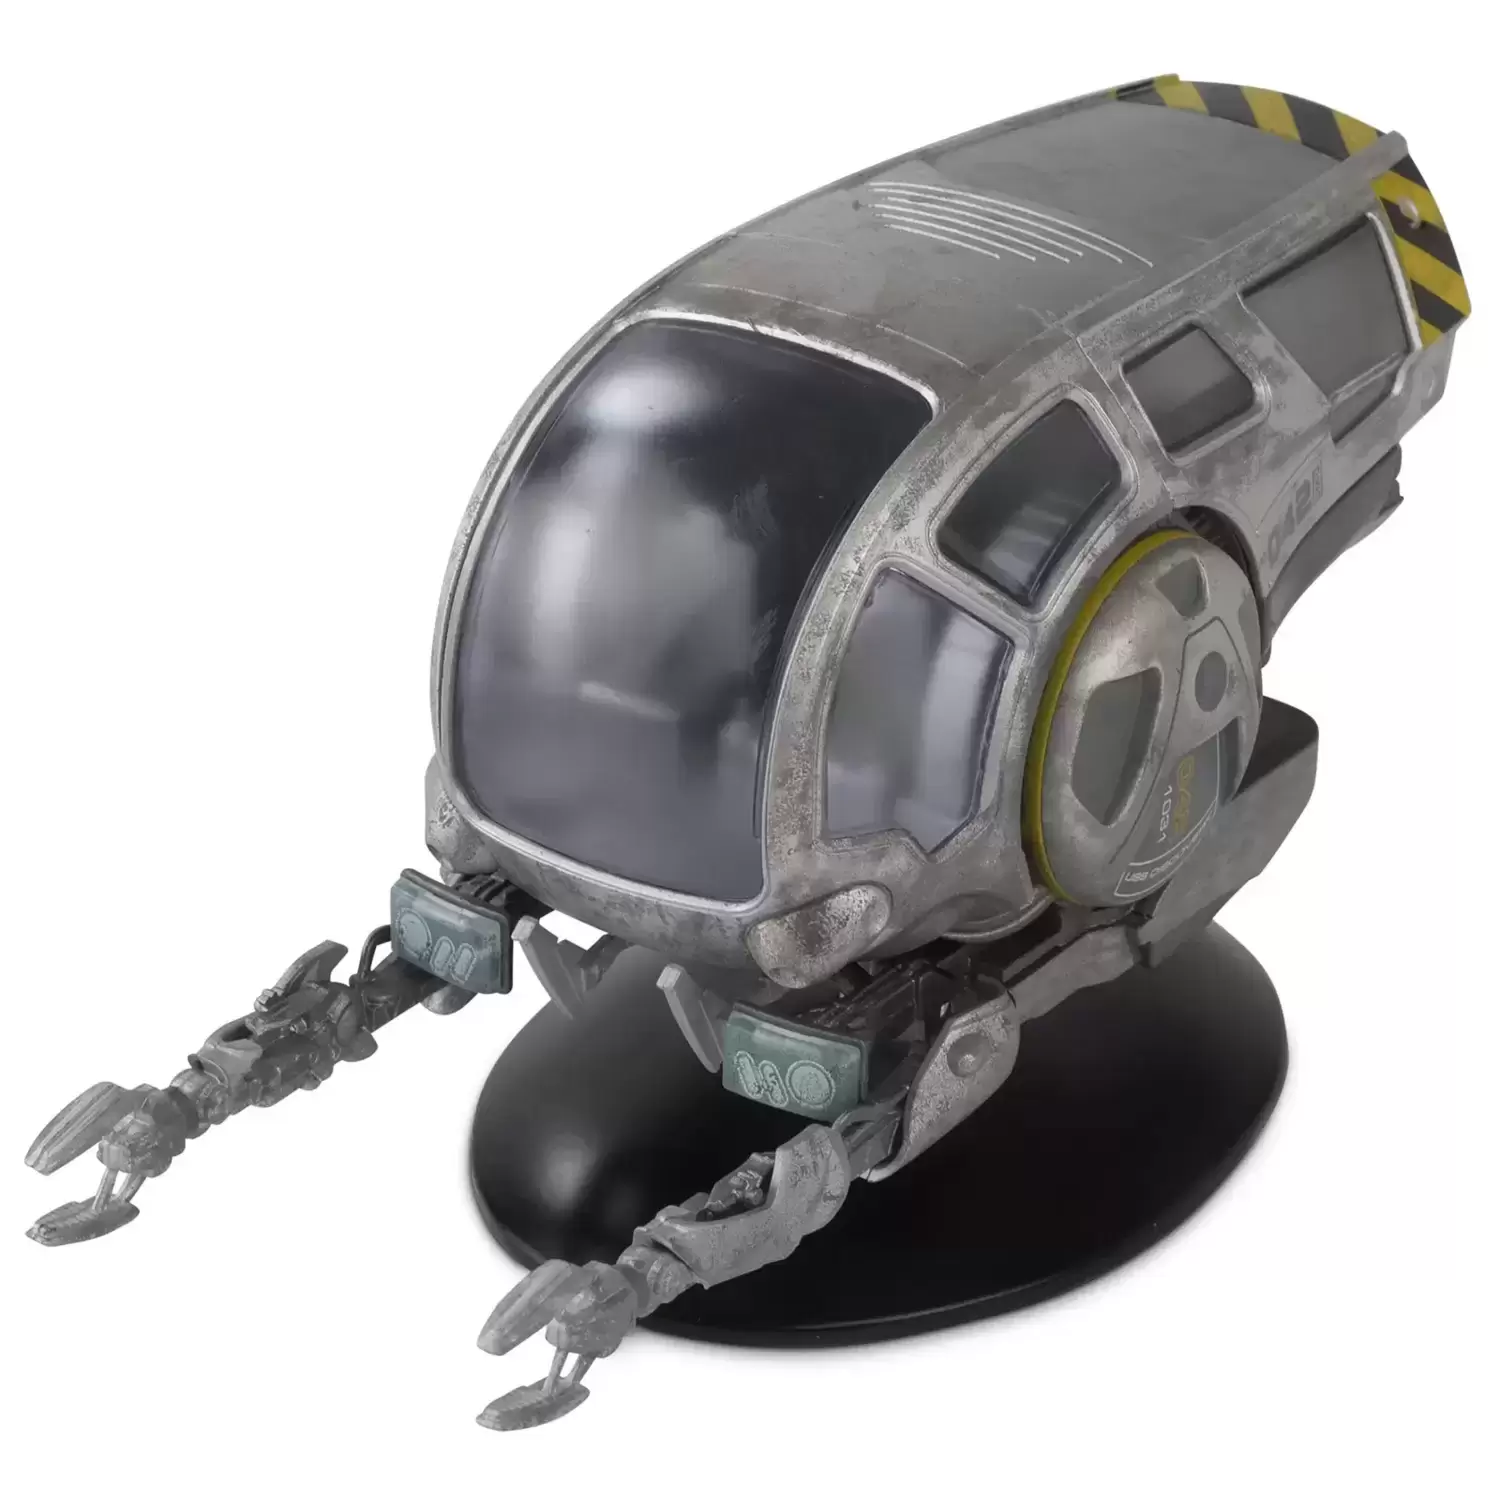 Star Trek Discovery The Official Starships Collection - Worker Bee